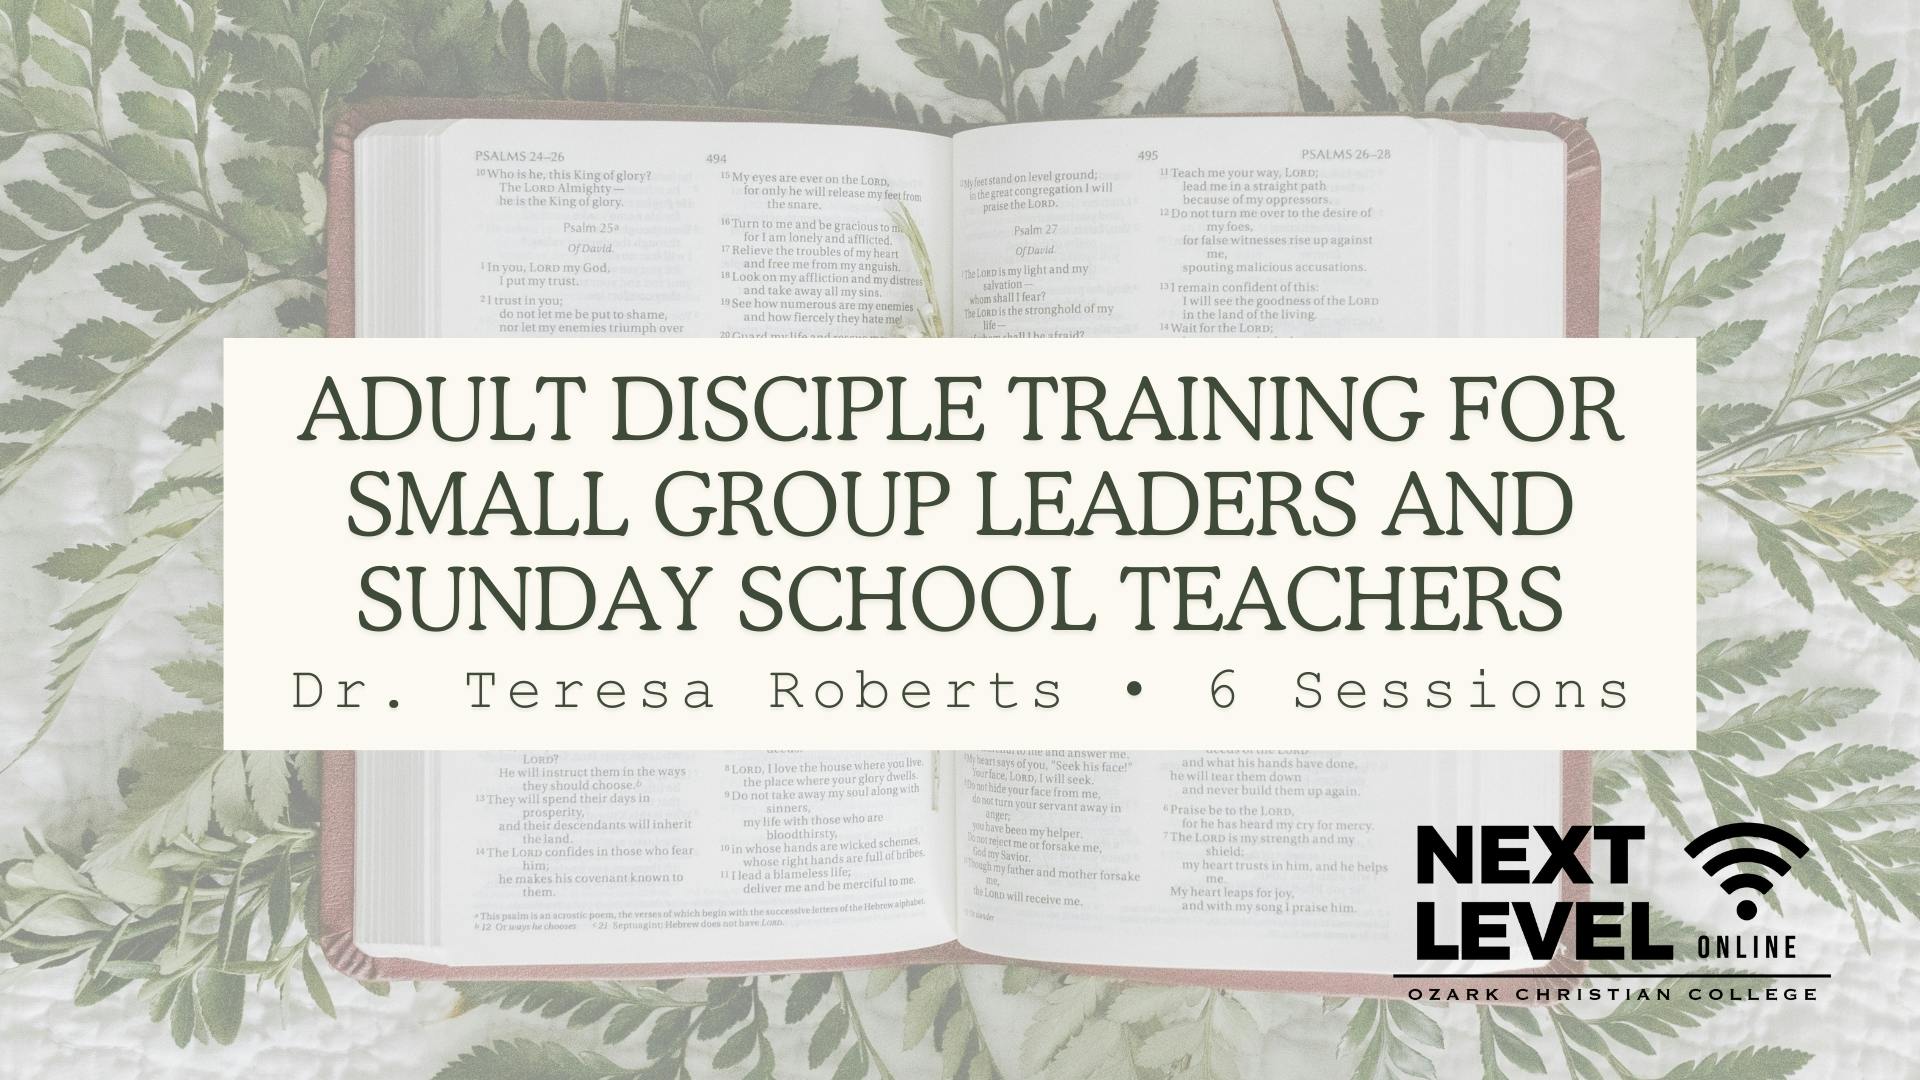 Adult Discipleship Training for Small Group leaders and Sunday School teachers